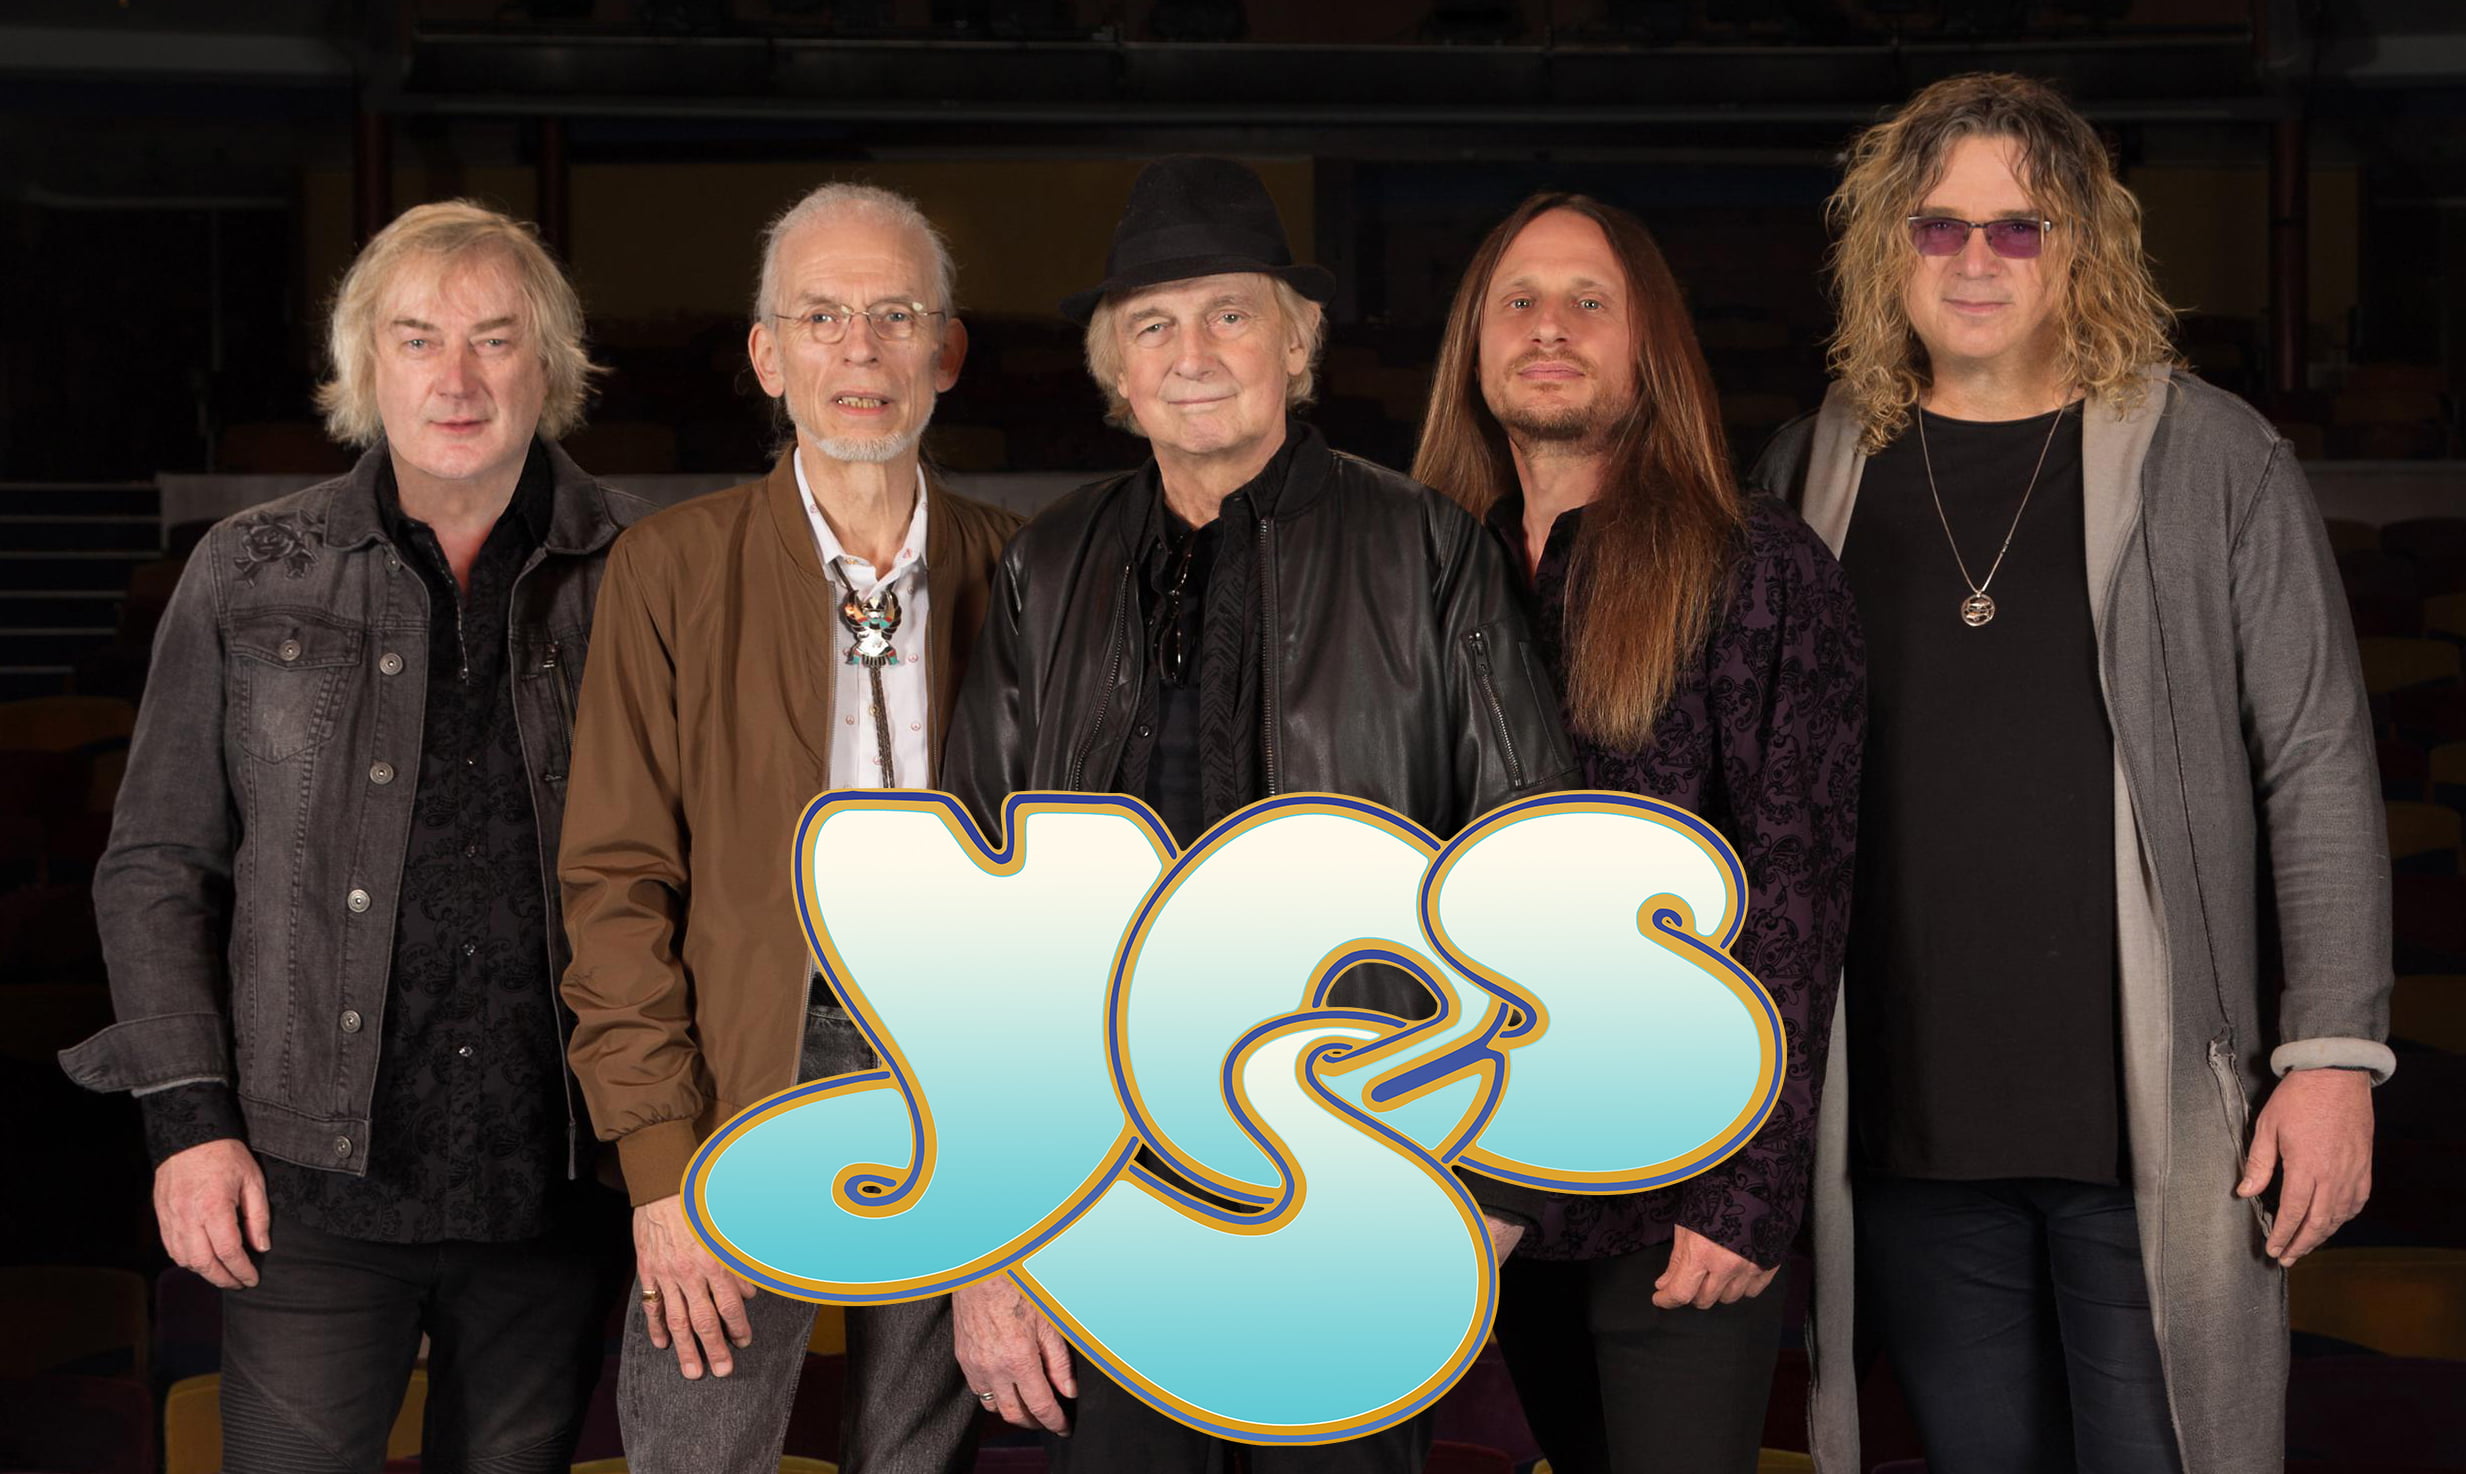 the yes tour